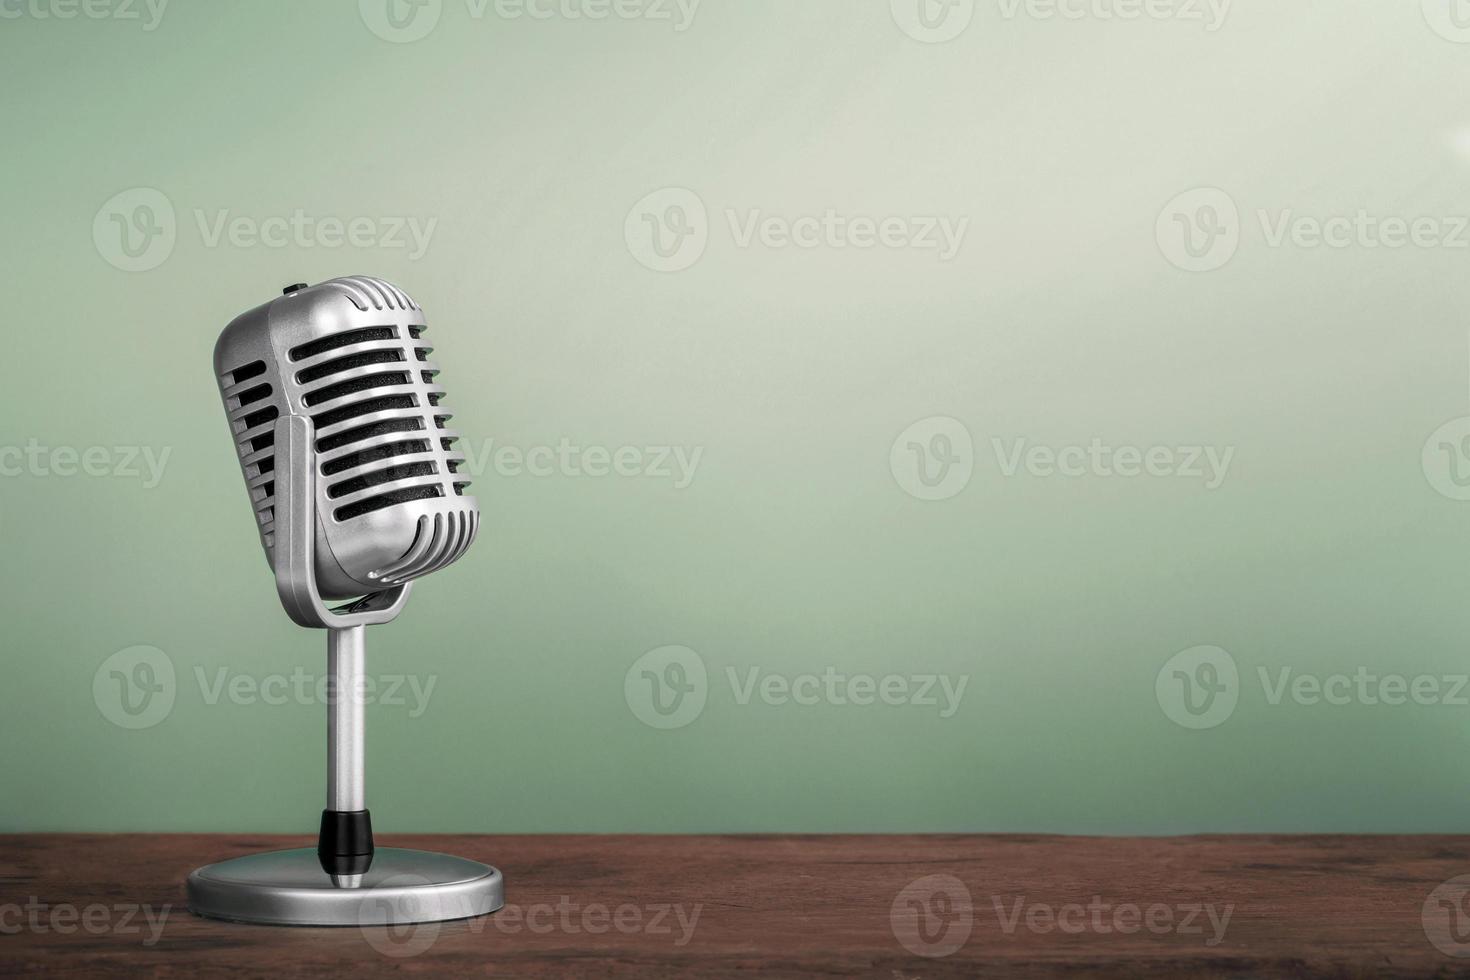 Retro microphone on wooden table vintage stlye photo